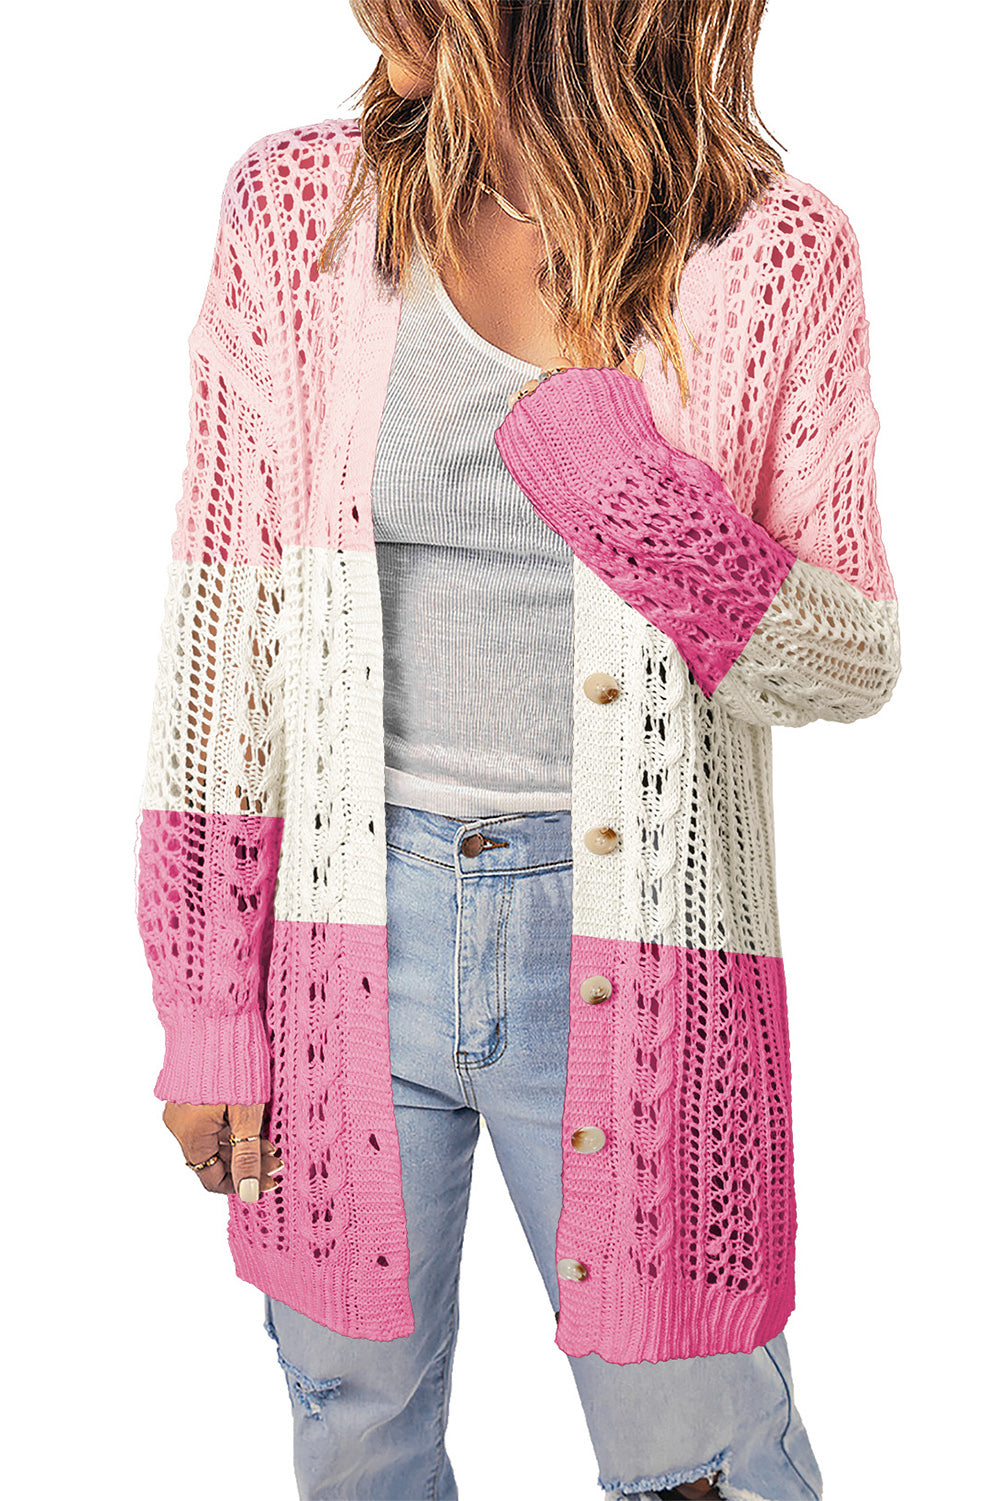 Openwork Ribbed Cuff Longline Cardigan - Women’s Clothing & Accessories - Shirts & Tops - 5 - 2024